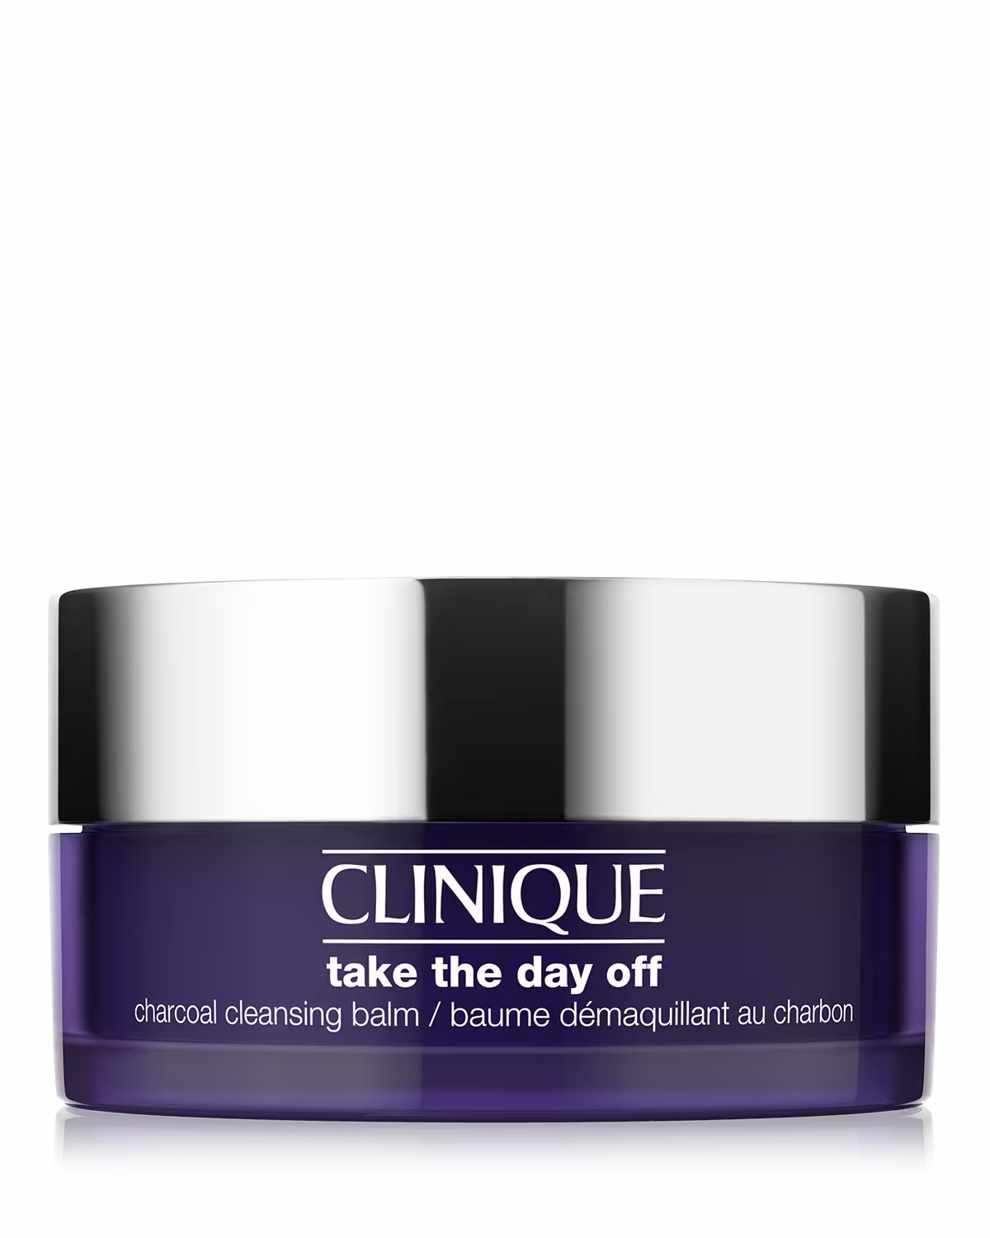 Take The Day Off™ Charcoal de Clinique